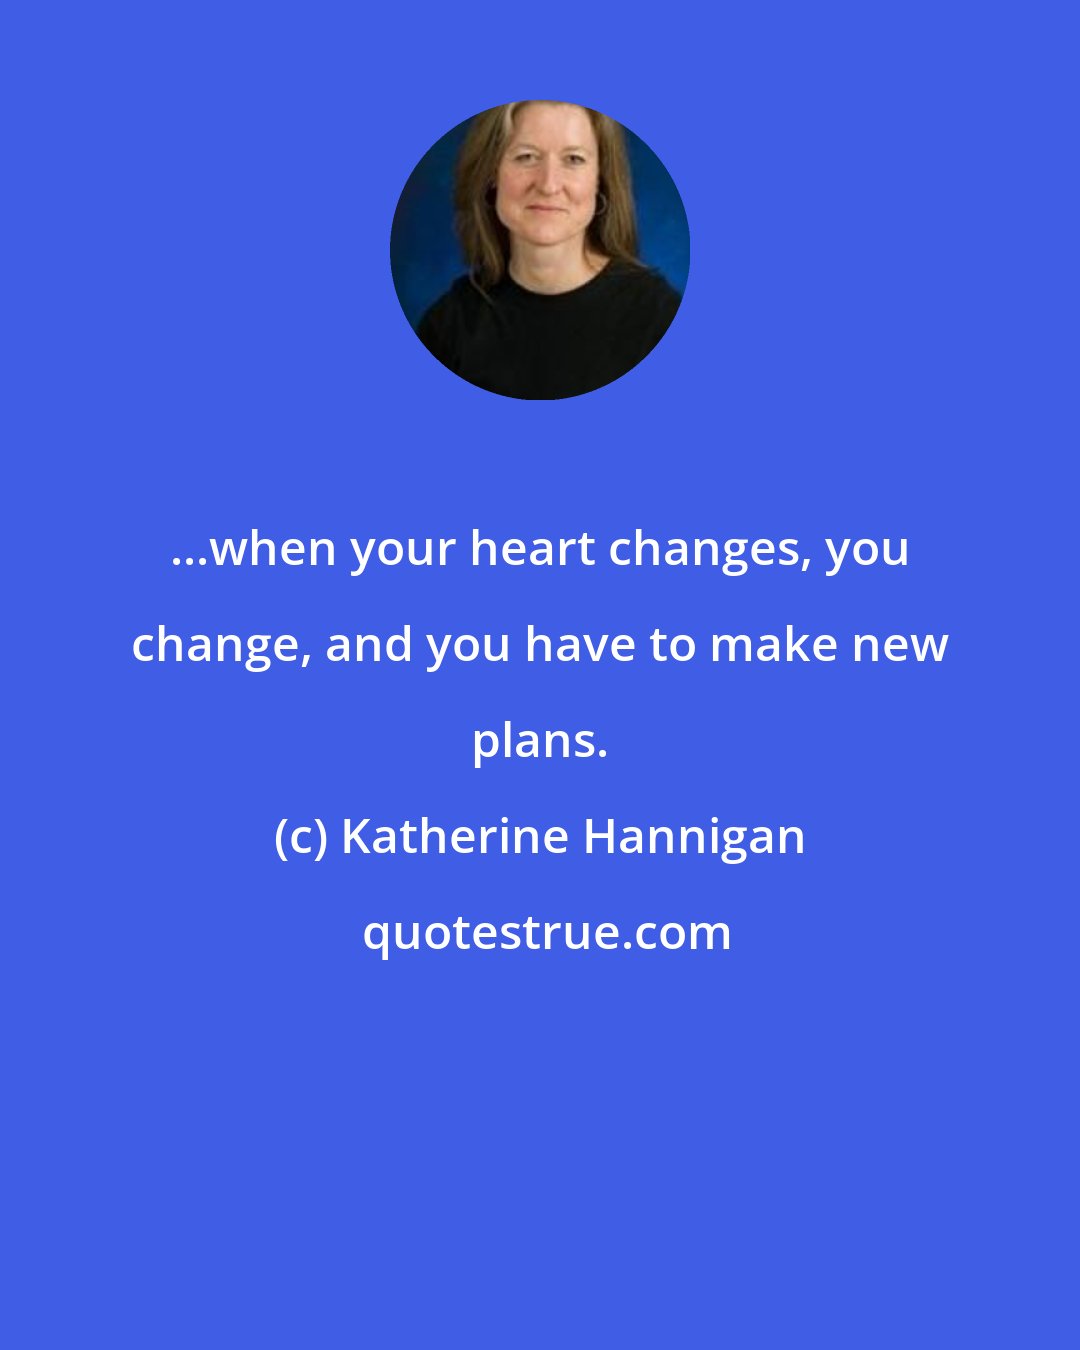 Katherine Hannigan: ...when your heart changes, you change, and you have to make new plans.